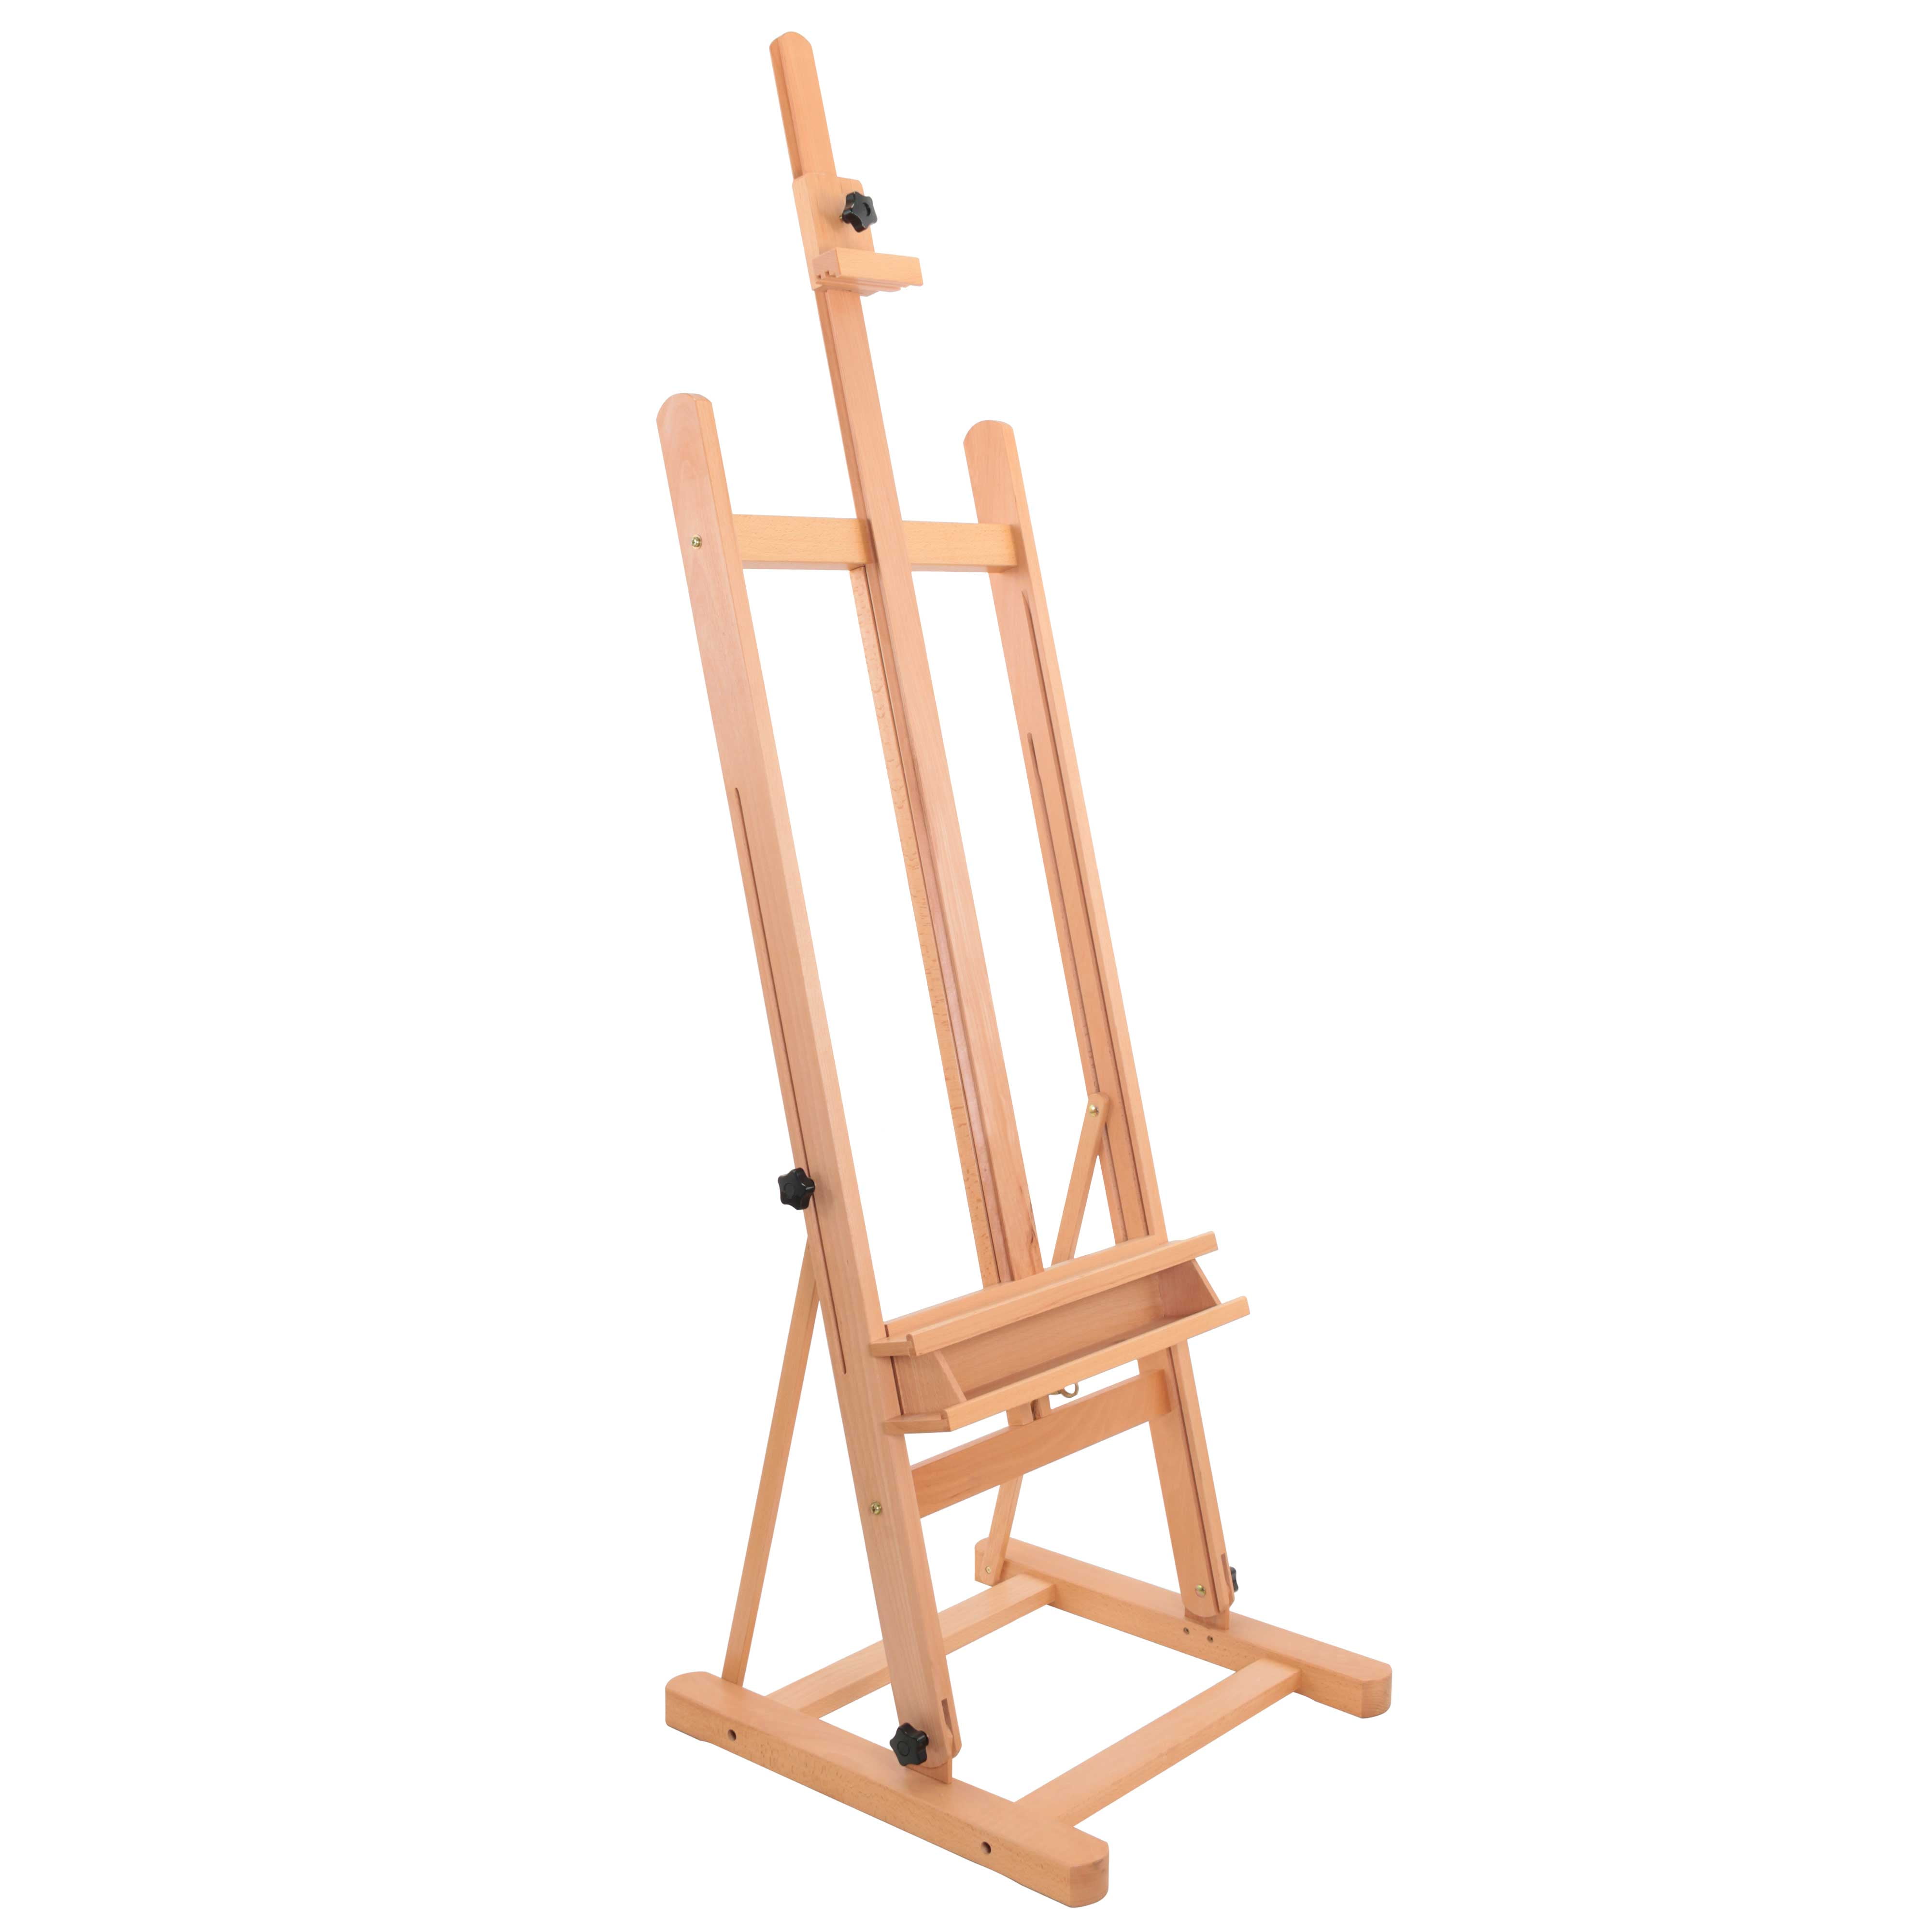 Sketching Display and Exhibition GYMAX Professional Collapsible Beech Wood Floor Standing Easel H-Frame Artist Studio Easel for Painting